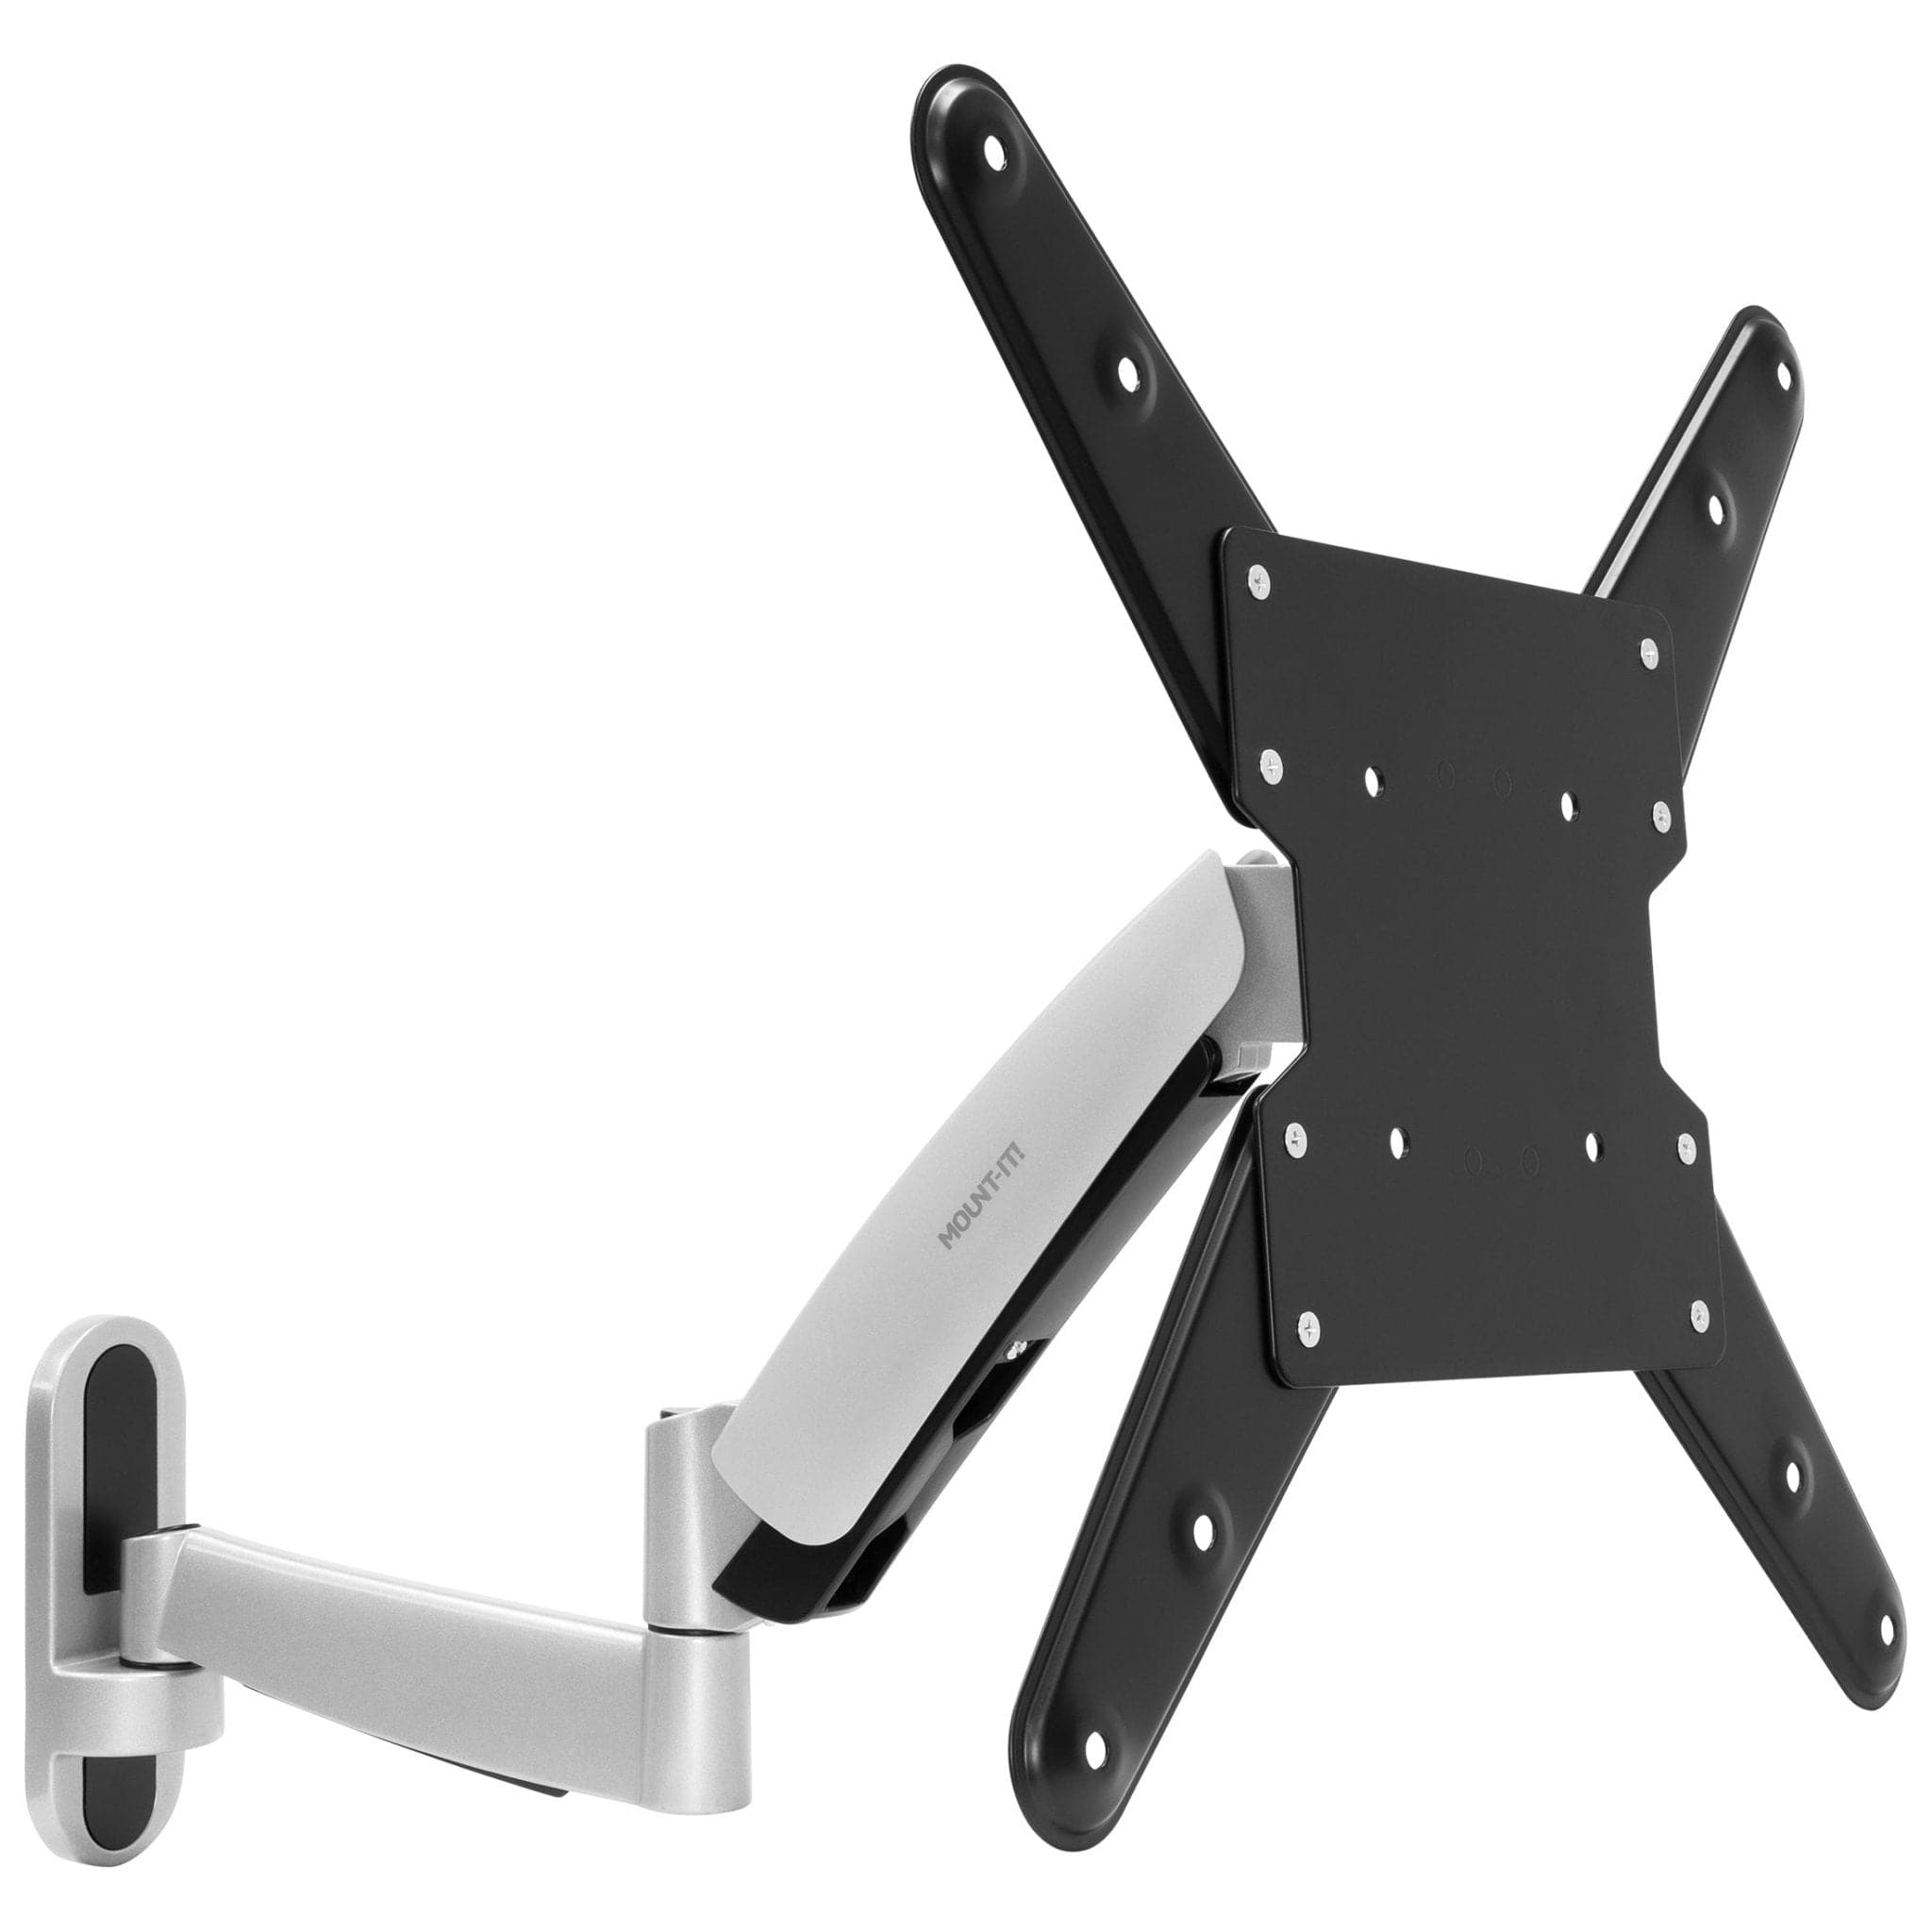 Large TV Wall Mount w/ Gas Spring Arm - Mount-It!